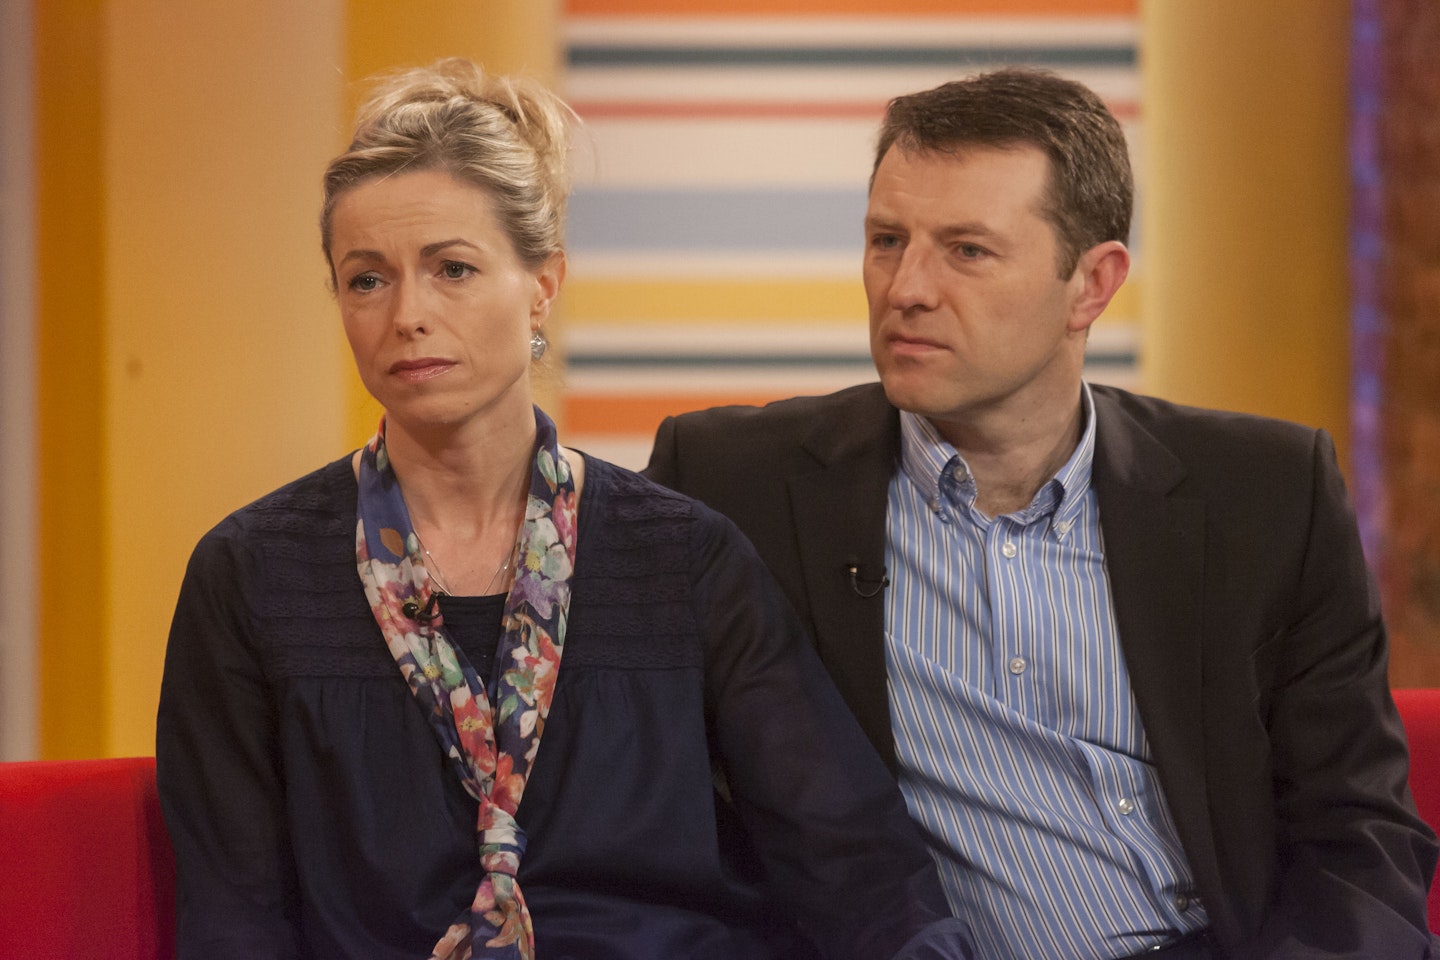 Gerry and kate McCann